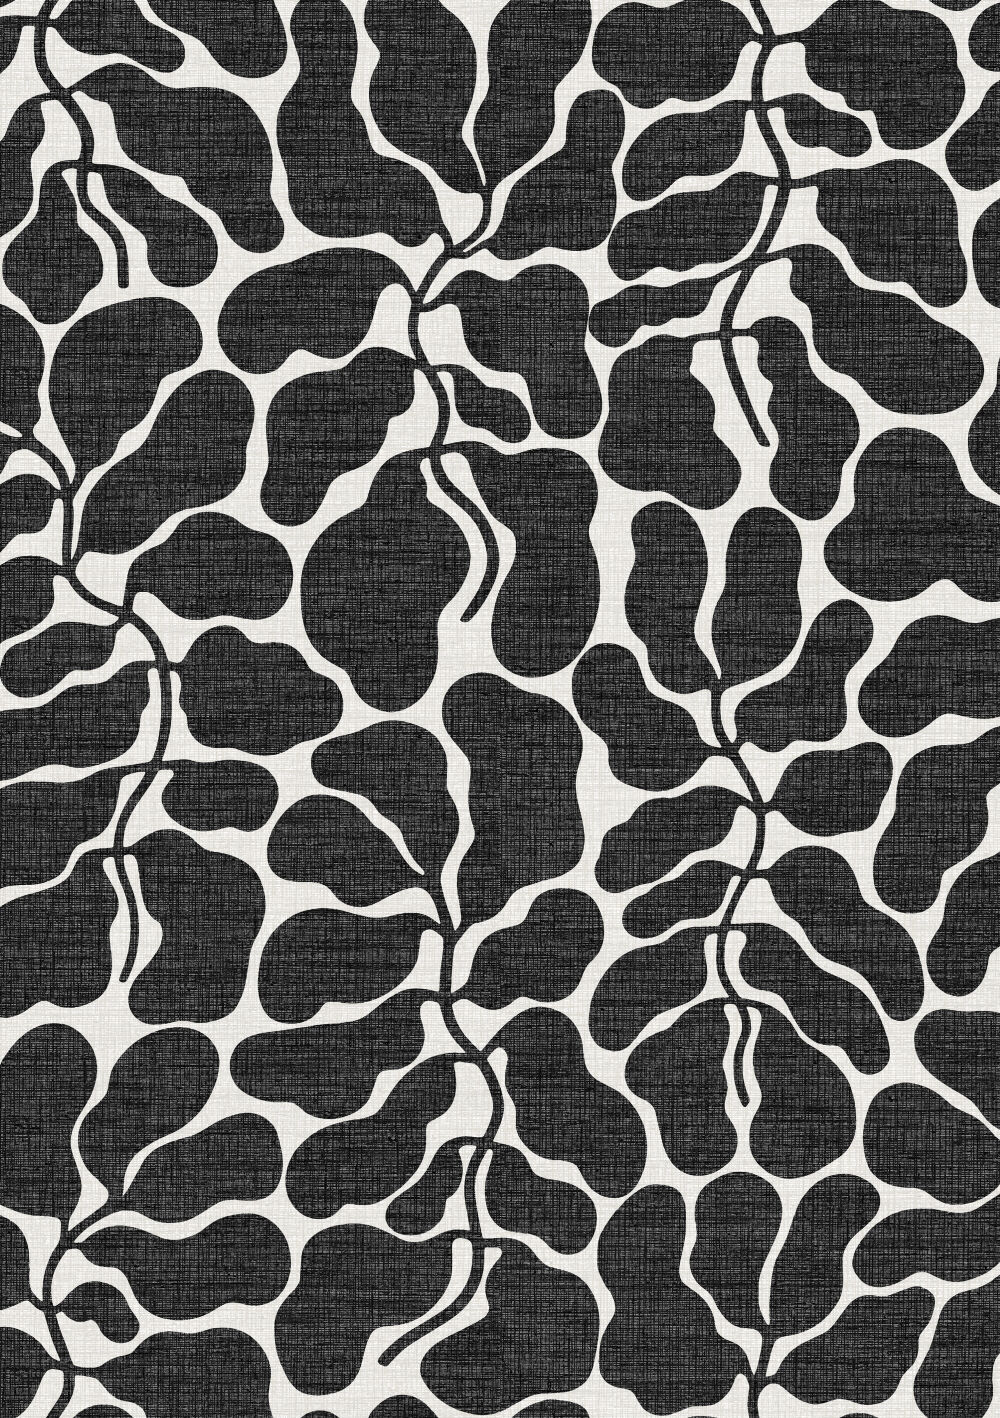 Wallpaper design by Linnéa Andersson